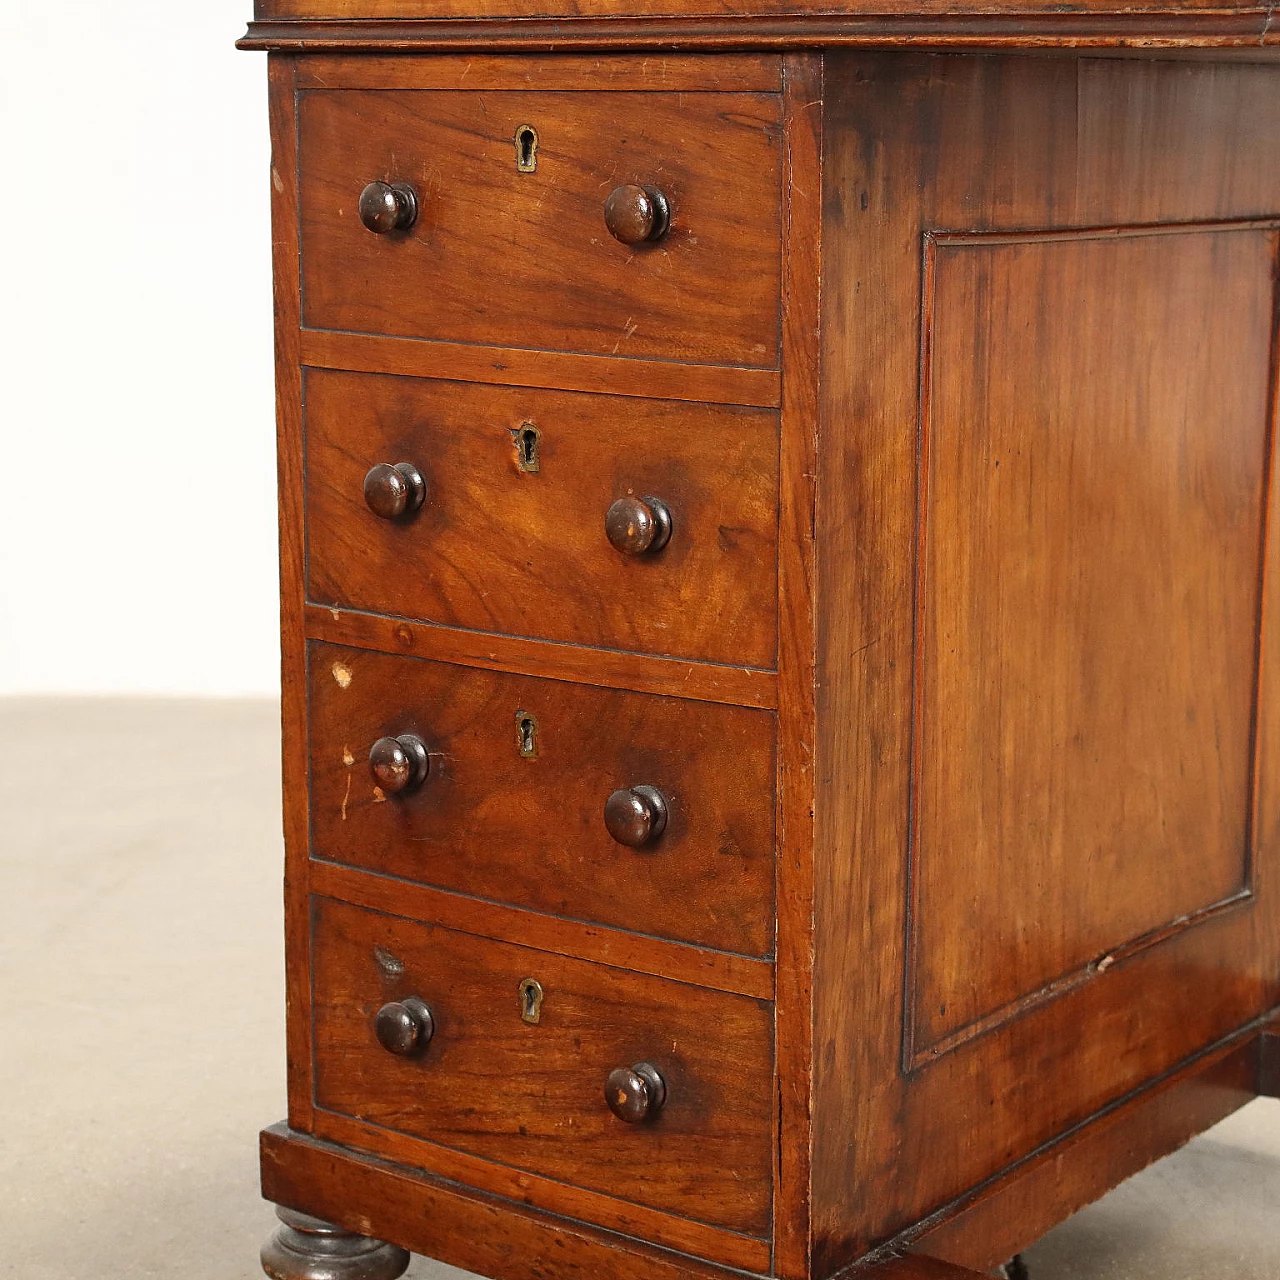 Davenport writing desk in walnut with caster feet, 1800s 6